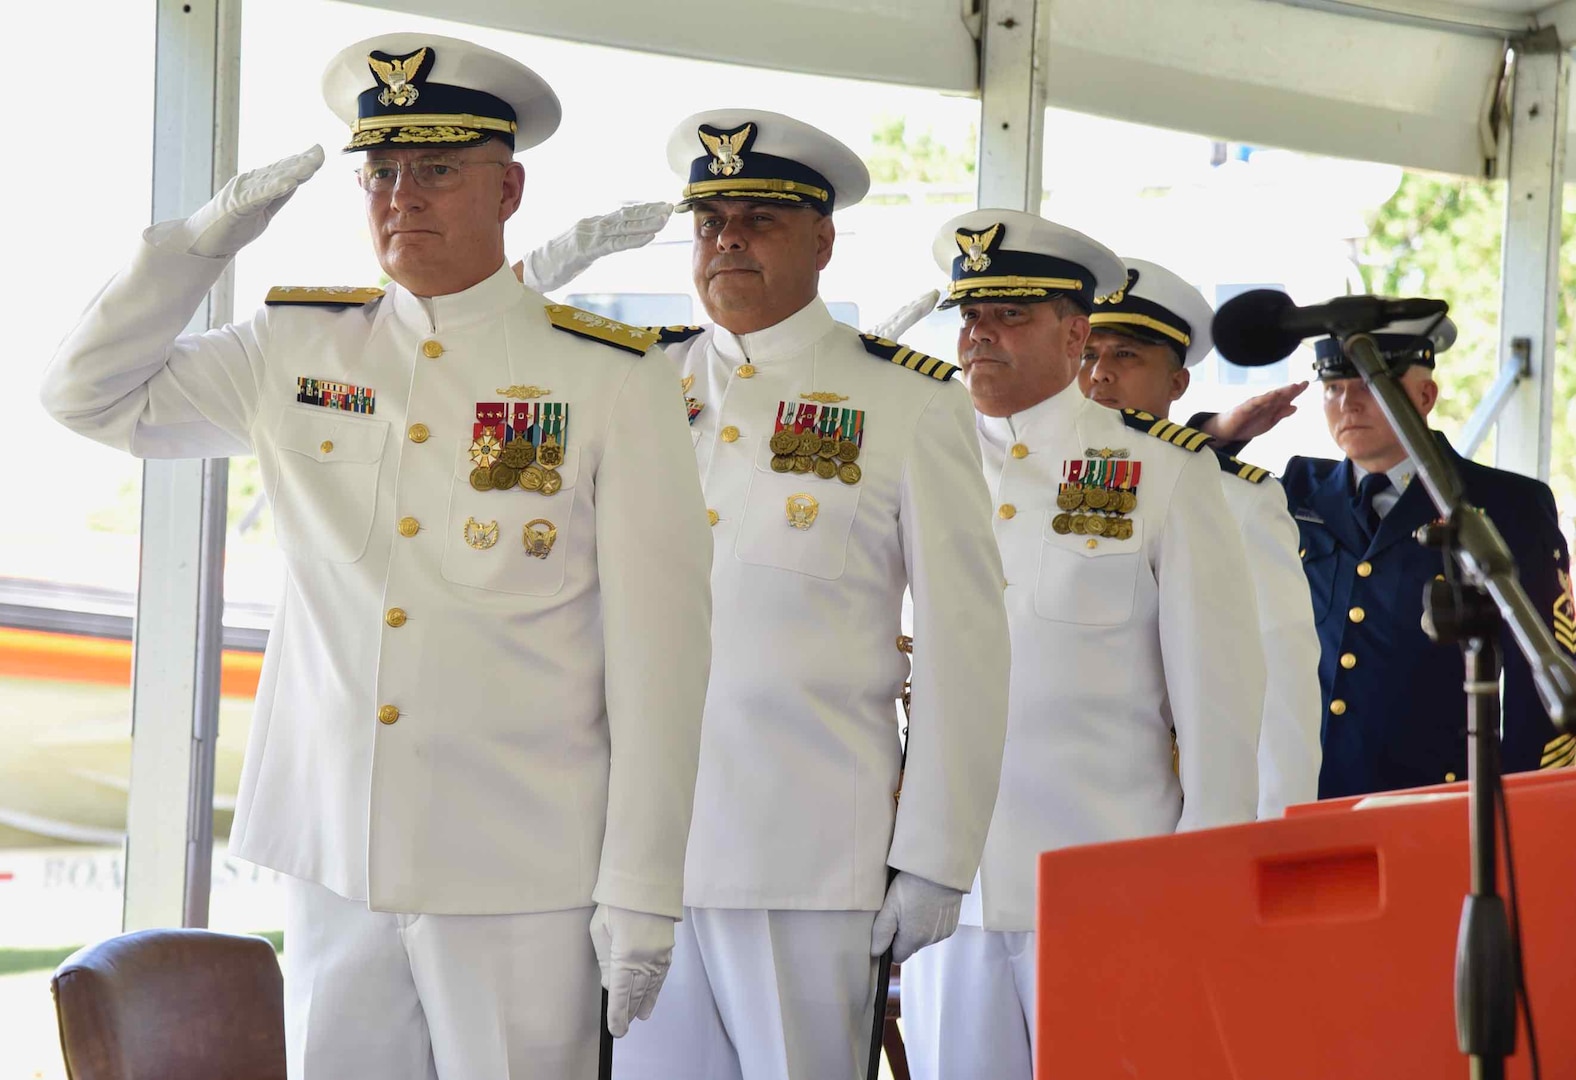 From front to rear, Rear Adm. Douglas M. Schofield, commander of the 7th Coast Guard District, Capt. José E. Díaz, Capt. Luis J. Rodríguez, LT. Genesis Guerrero, and Master Chief Petty Officer Michael Hvozda salute during the playing of anthems at the Sector San Juan Command Ceremony in San Juan, Puerto Rico June 13, 2024. During the ceremony, Capt. Luis J. Rodríguez relieved Capt. José E. Díaz as the commander of Sector San Juan. (Coast Guard Photo by Ricardo Castrodad)